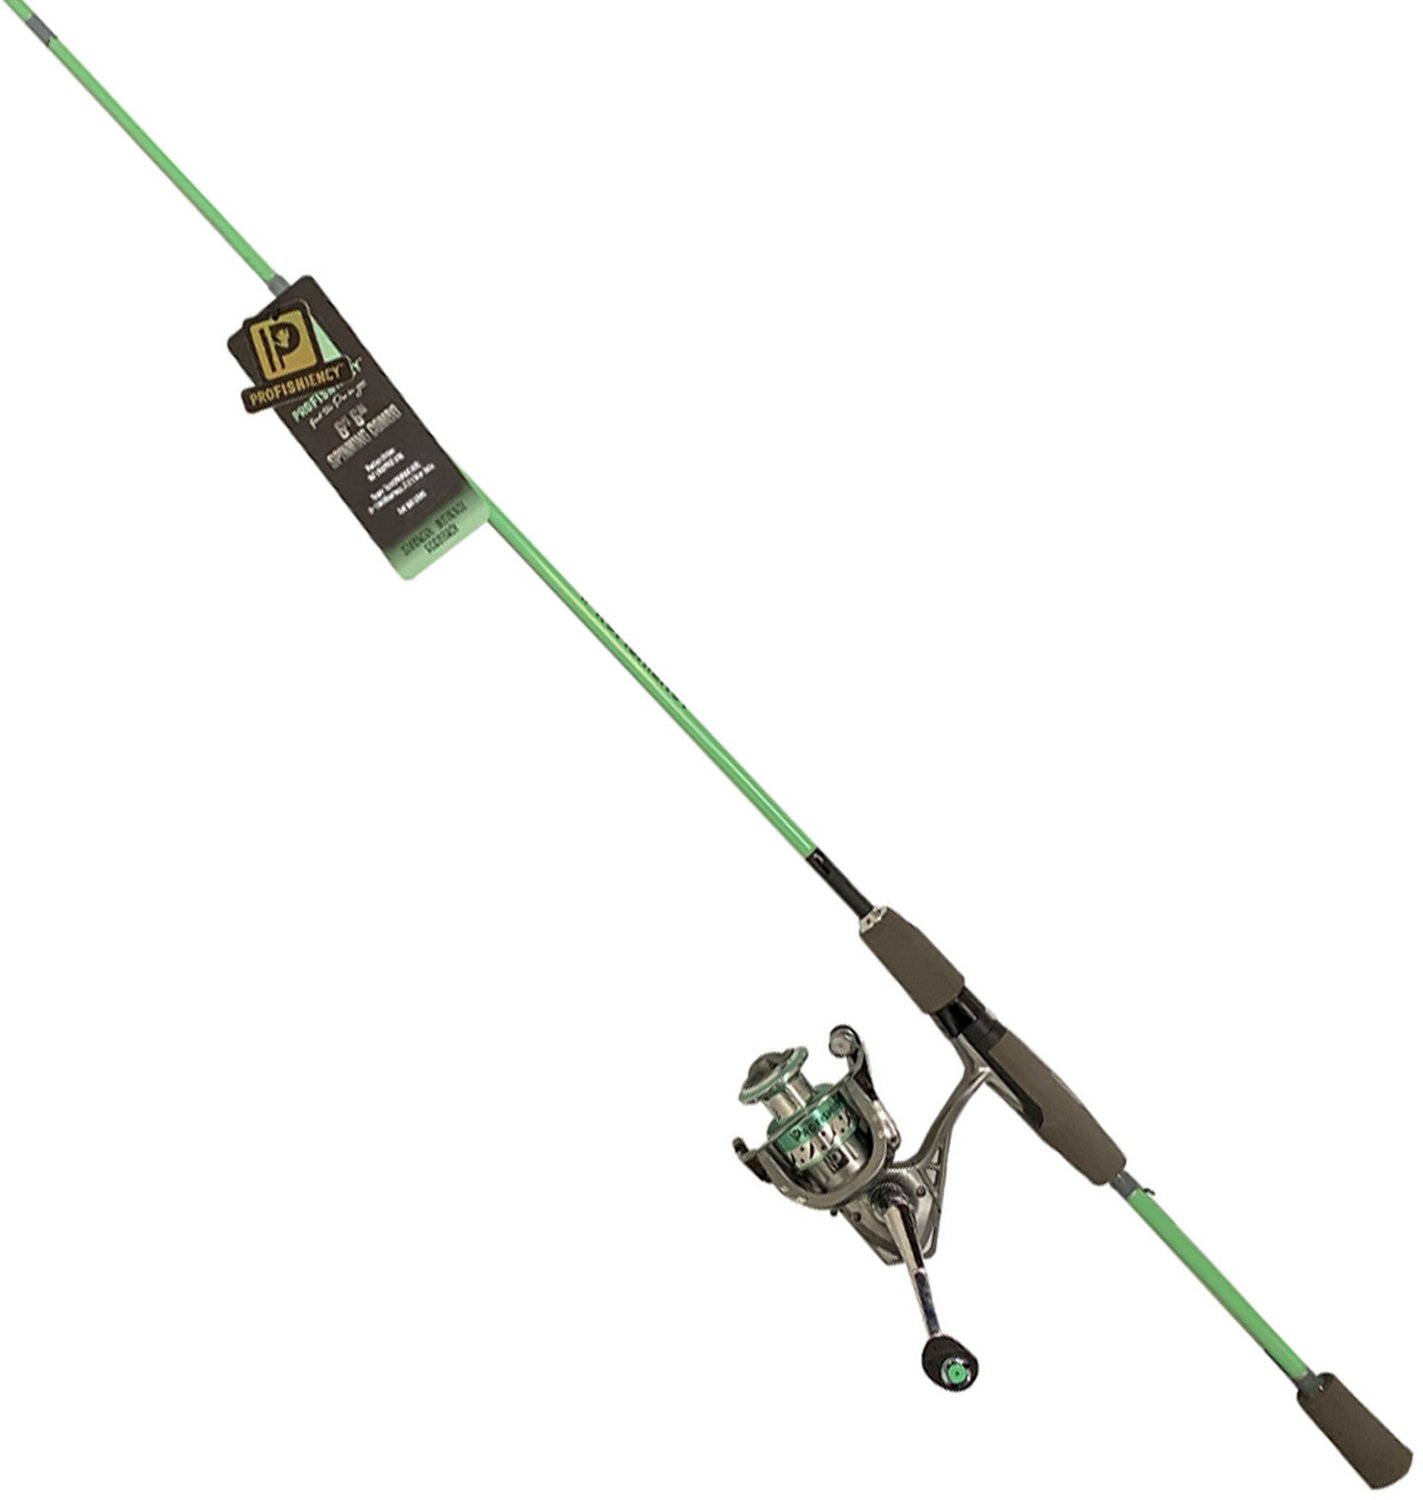 ProFISHiency Mint 2500 Spinning Rod and Reel Combo